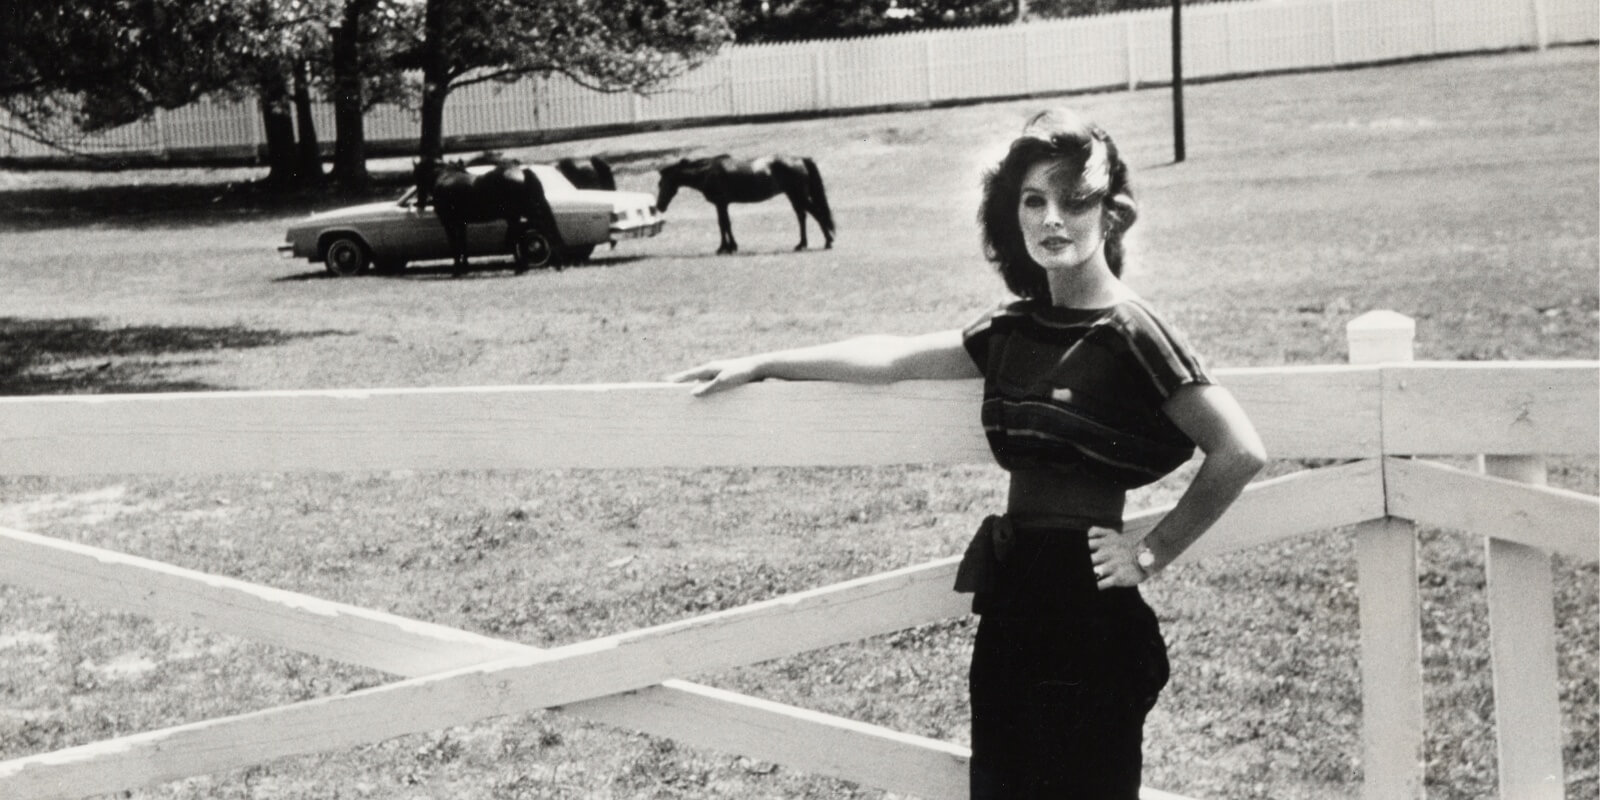 Priscilla Presley poses on the grounds of Graceland near the stables in the early 1980s.